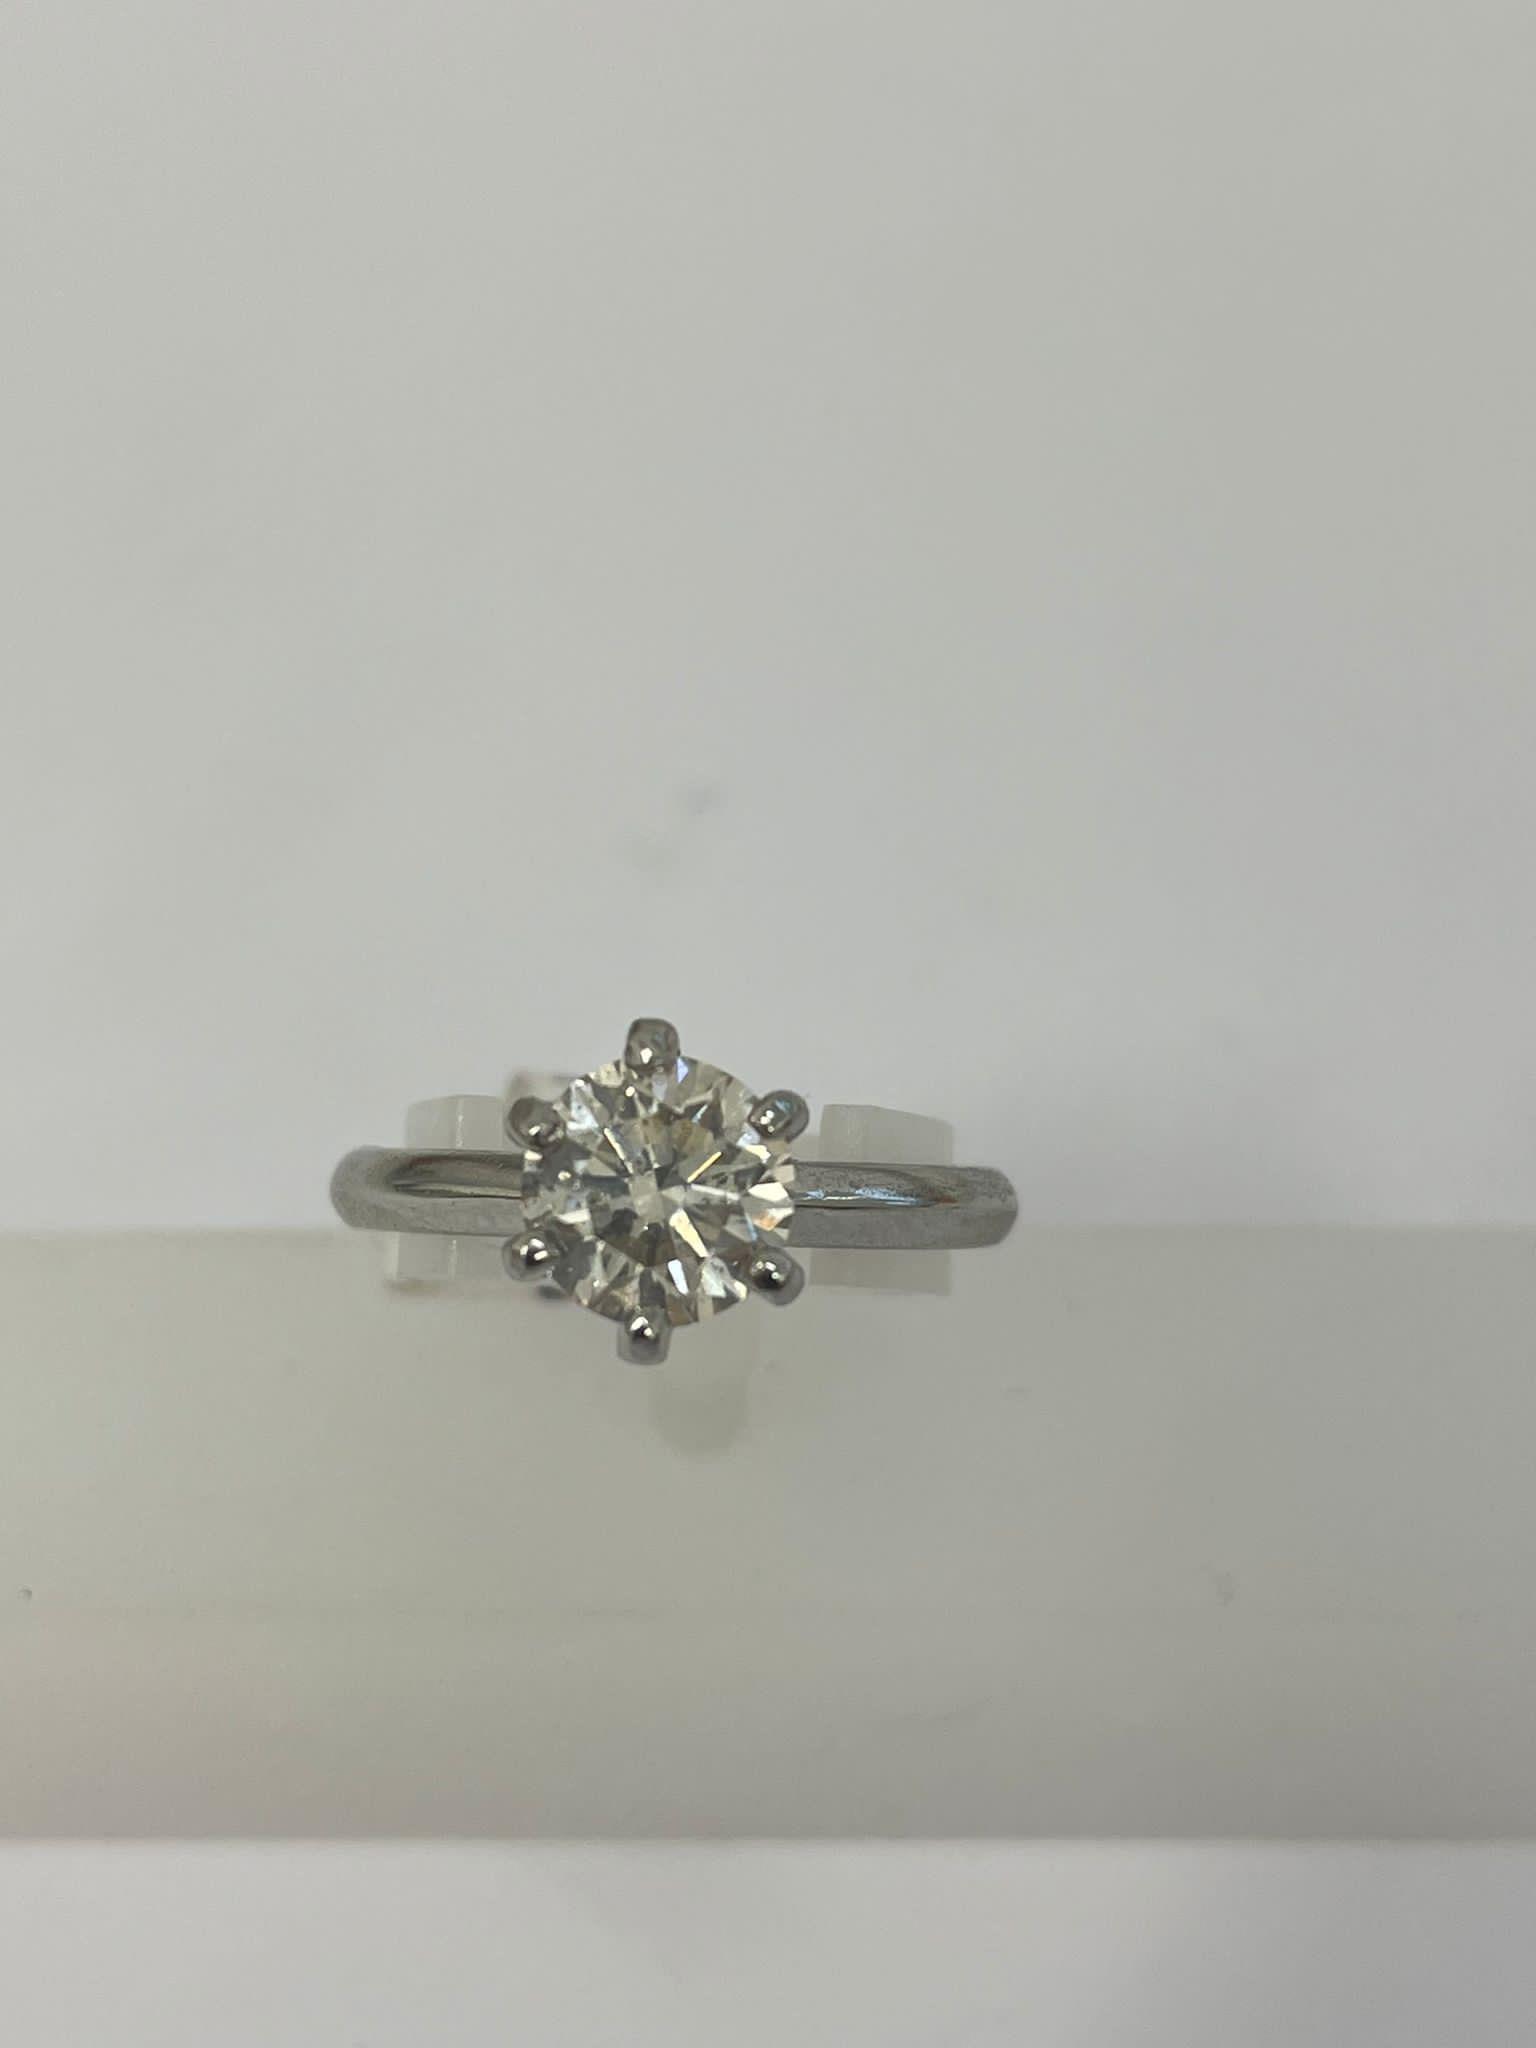 A LADIES 1.3 CARAT DIAMOND AND PLATINUM RING, SIX CLAW SET, COLOUR G/H, CLARITY SI-1, SIZE L/M, - Image 2 of 4